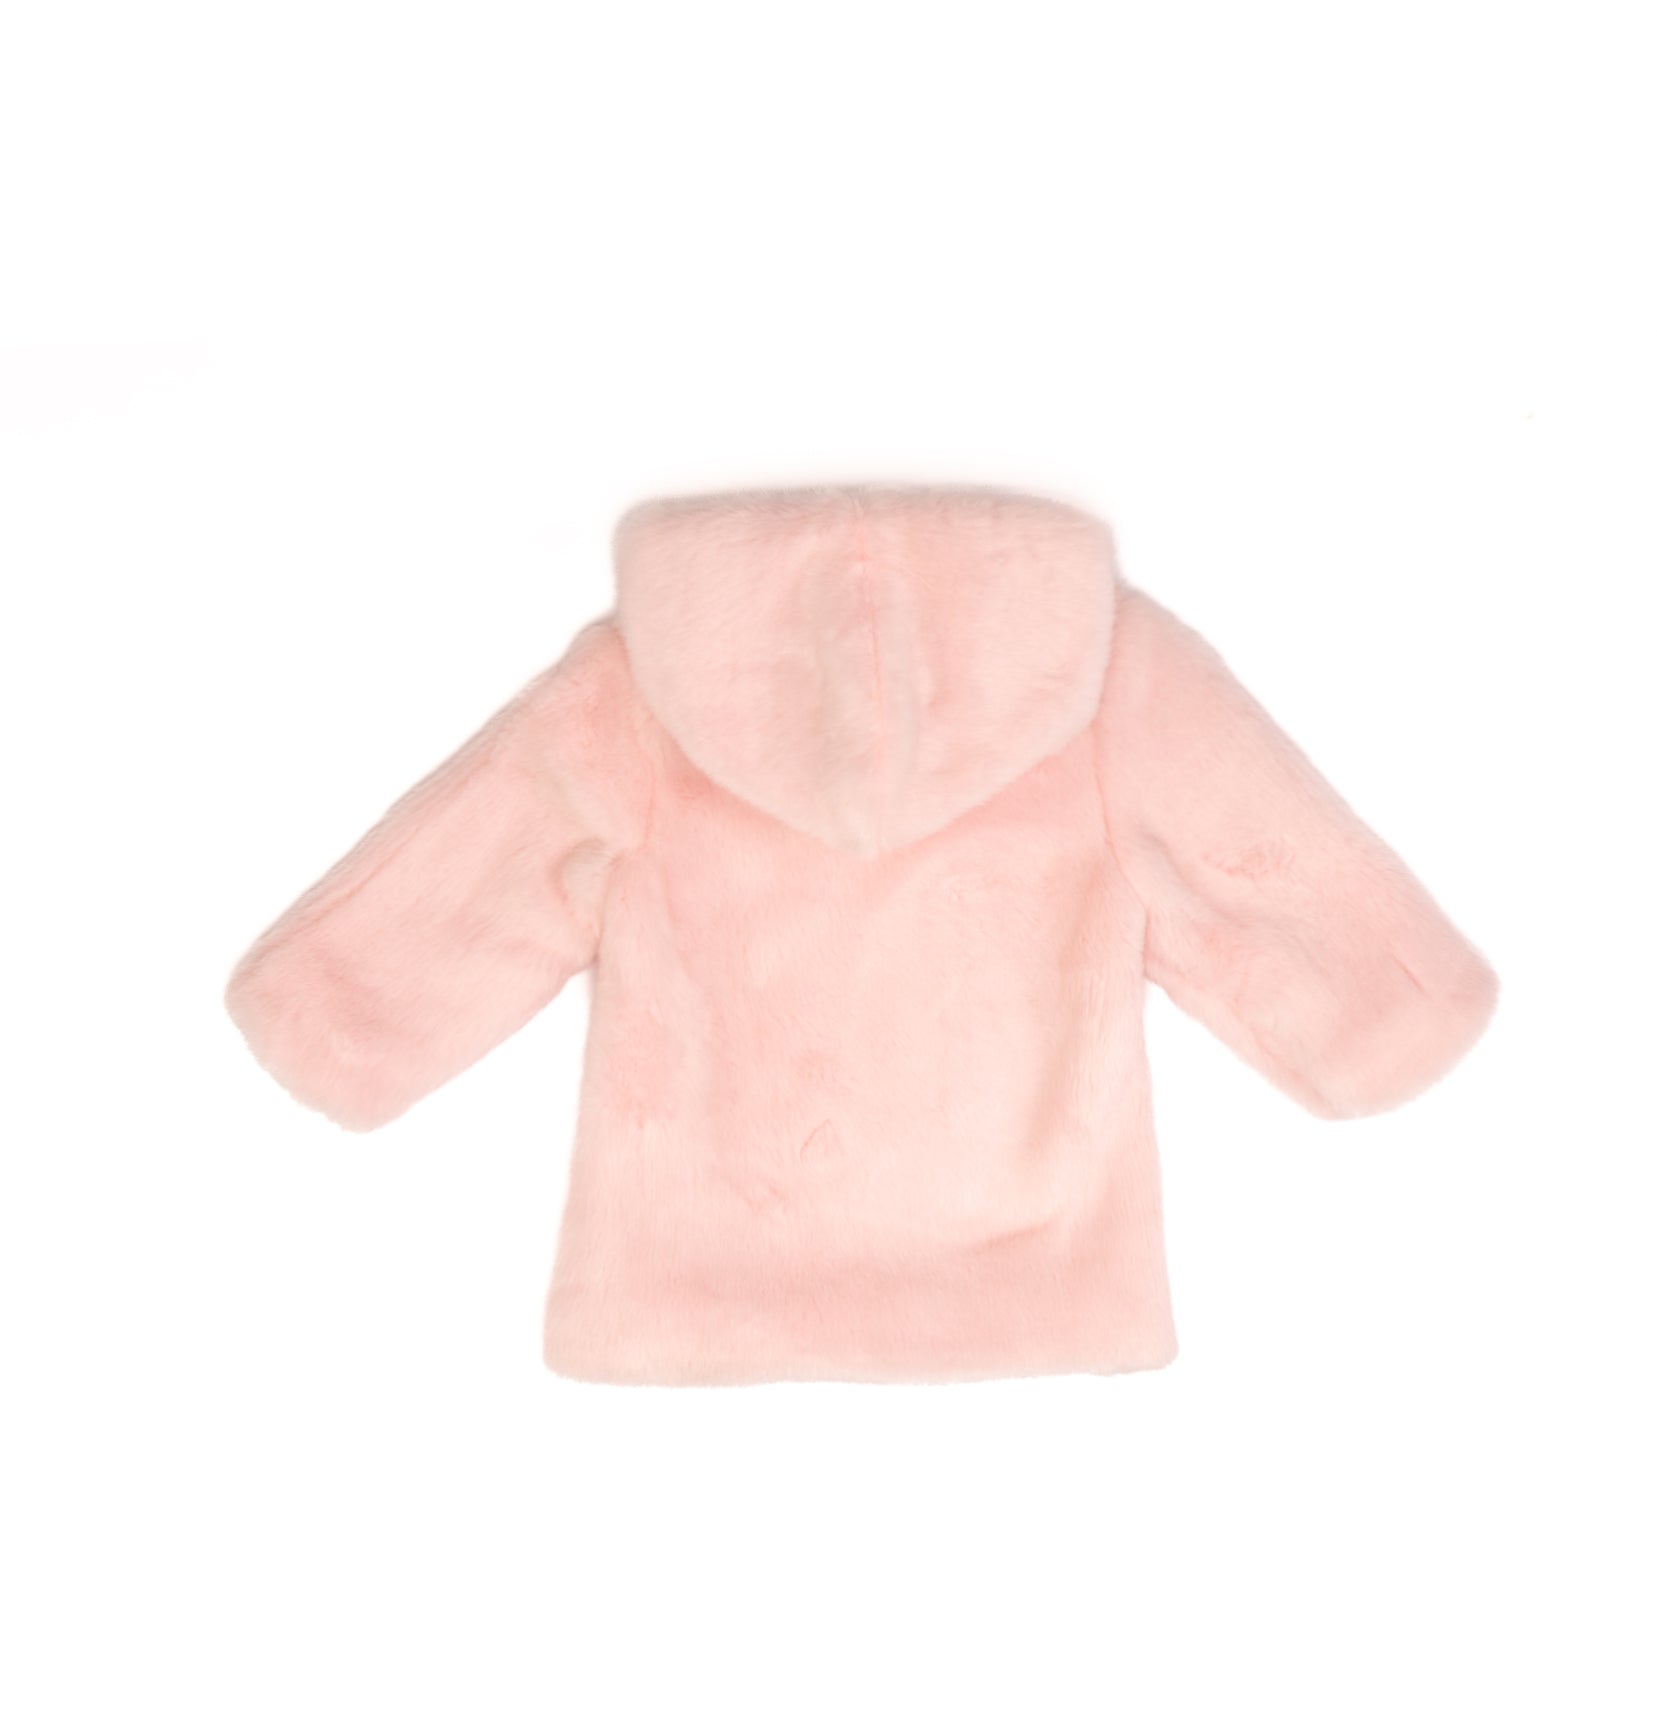 Luxury long fur baby girl jacket by Pompelo